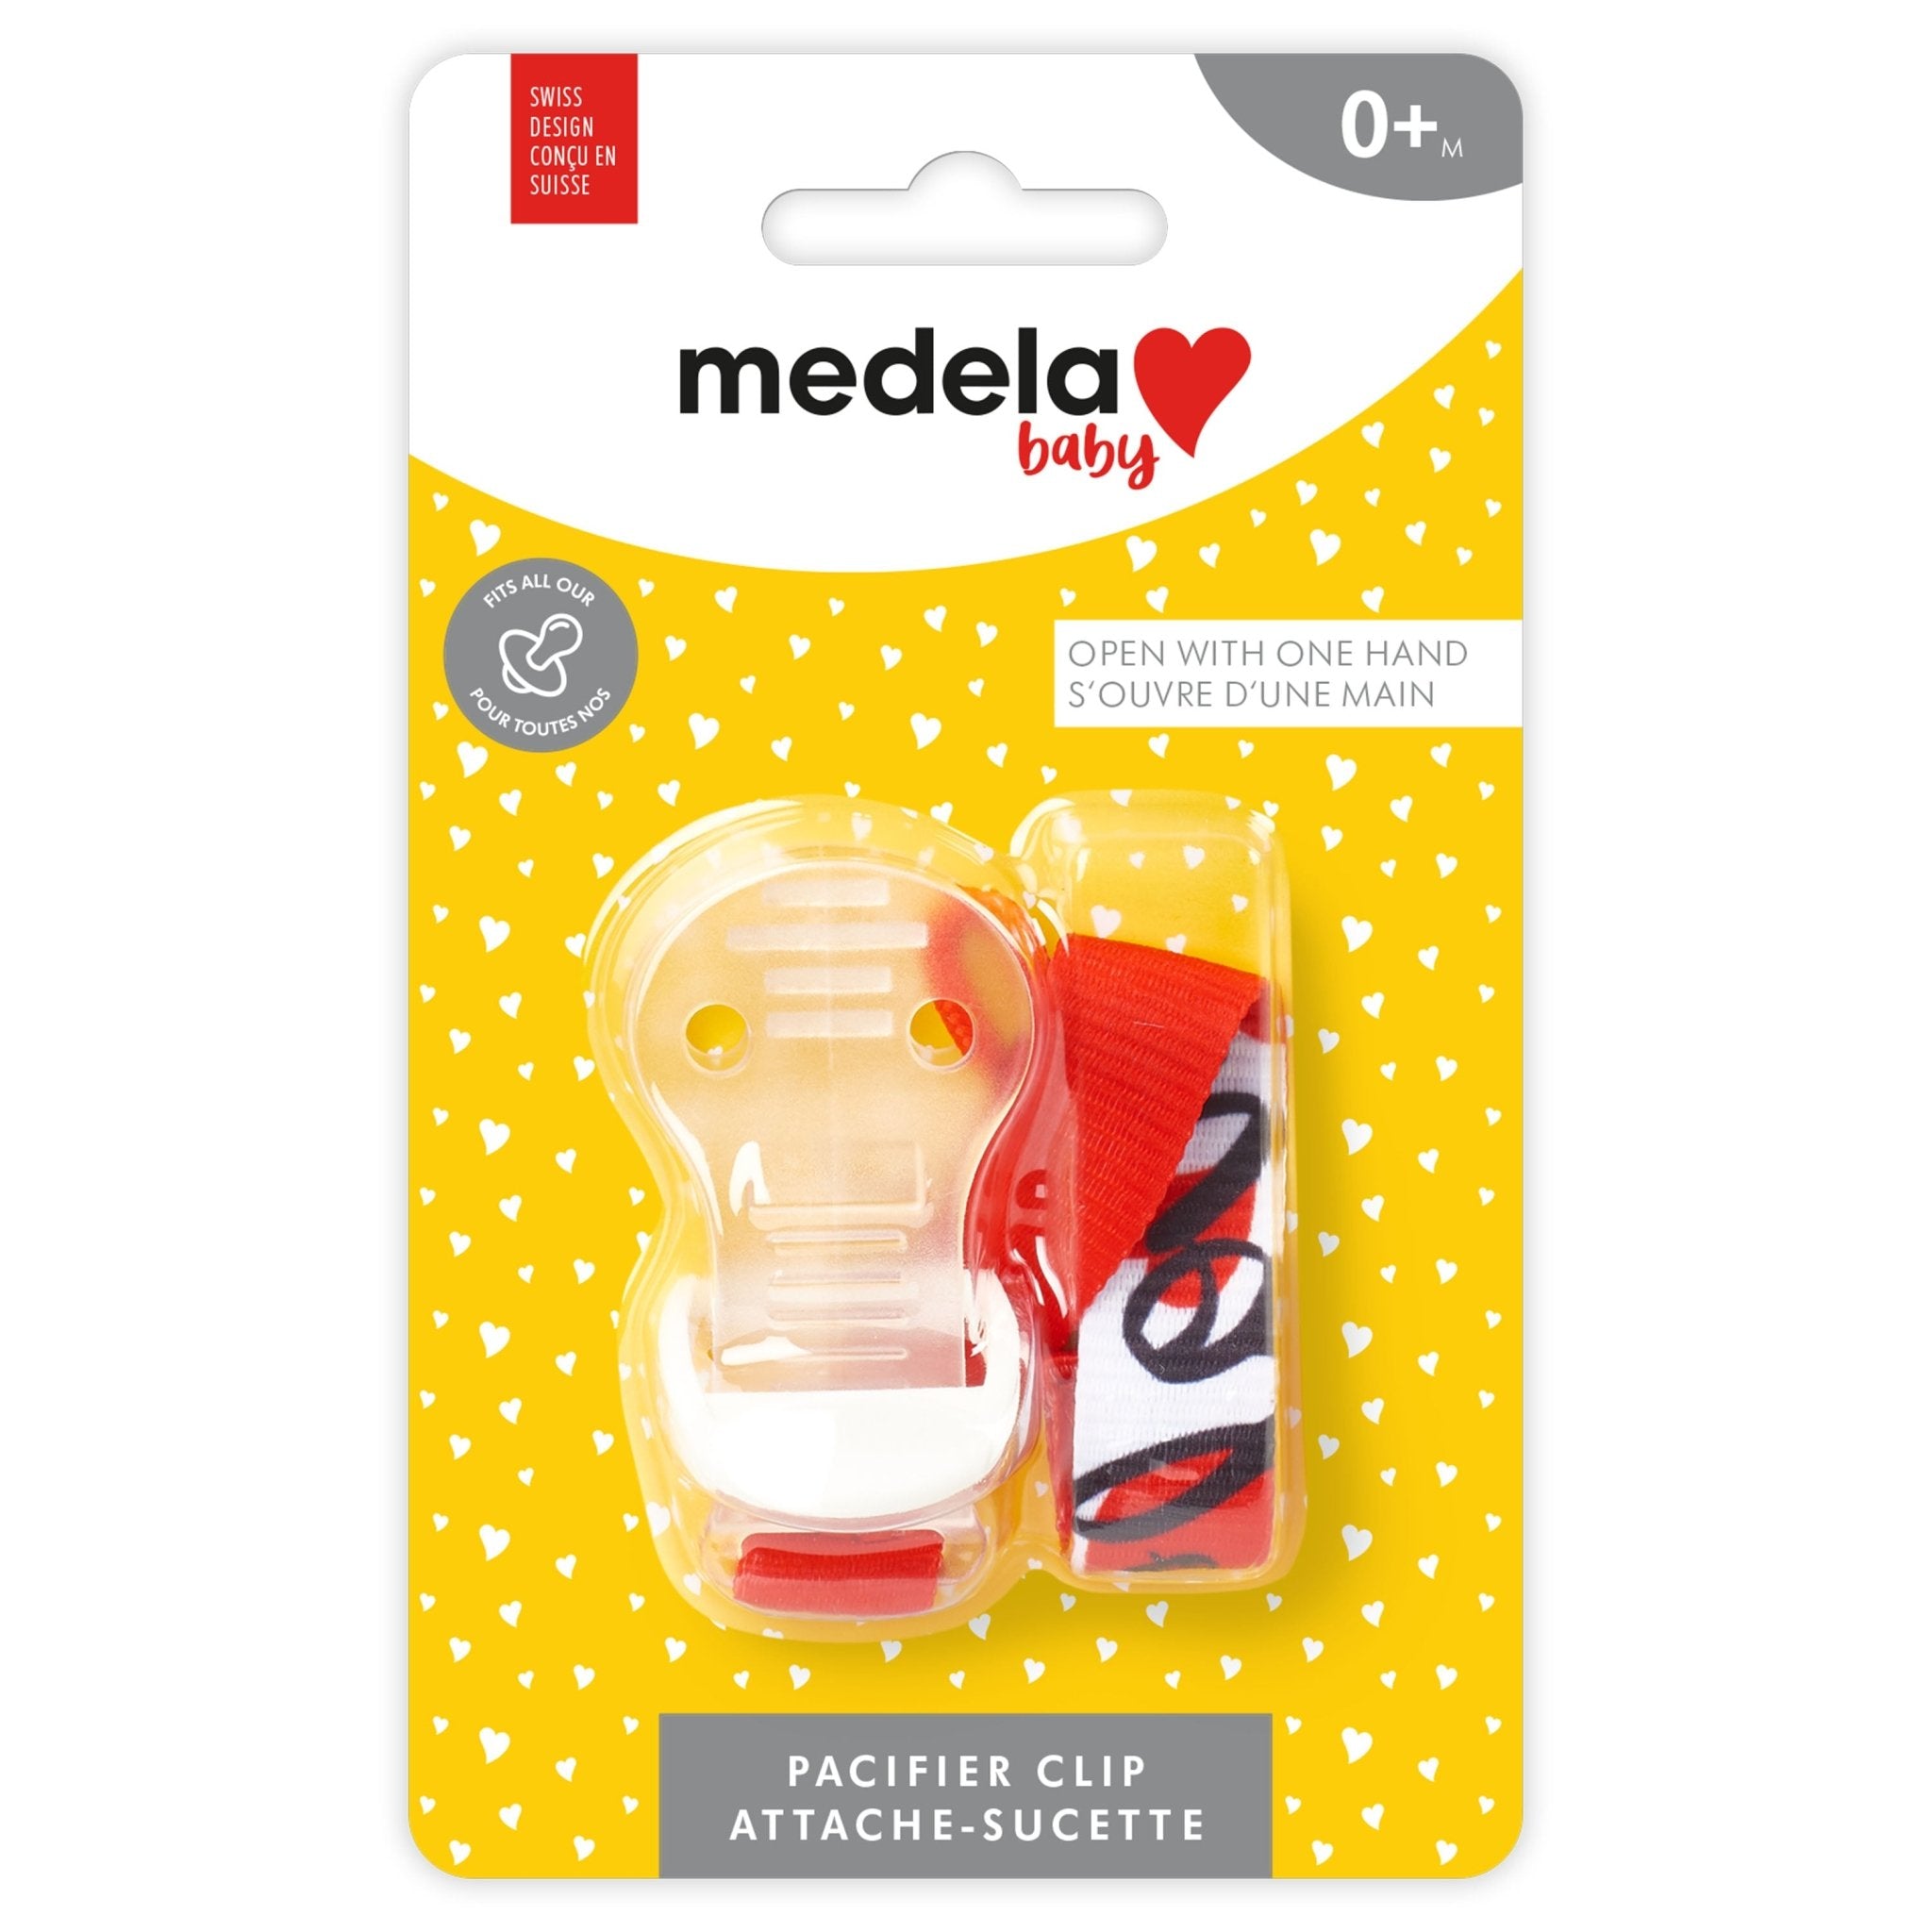 Medela Pacifier Clip, Unisex - ANB Baby -BPA free pacifier clip